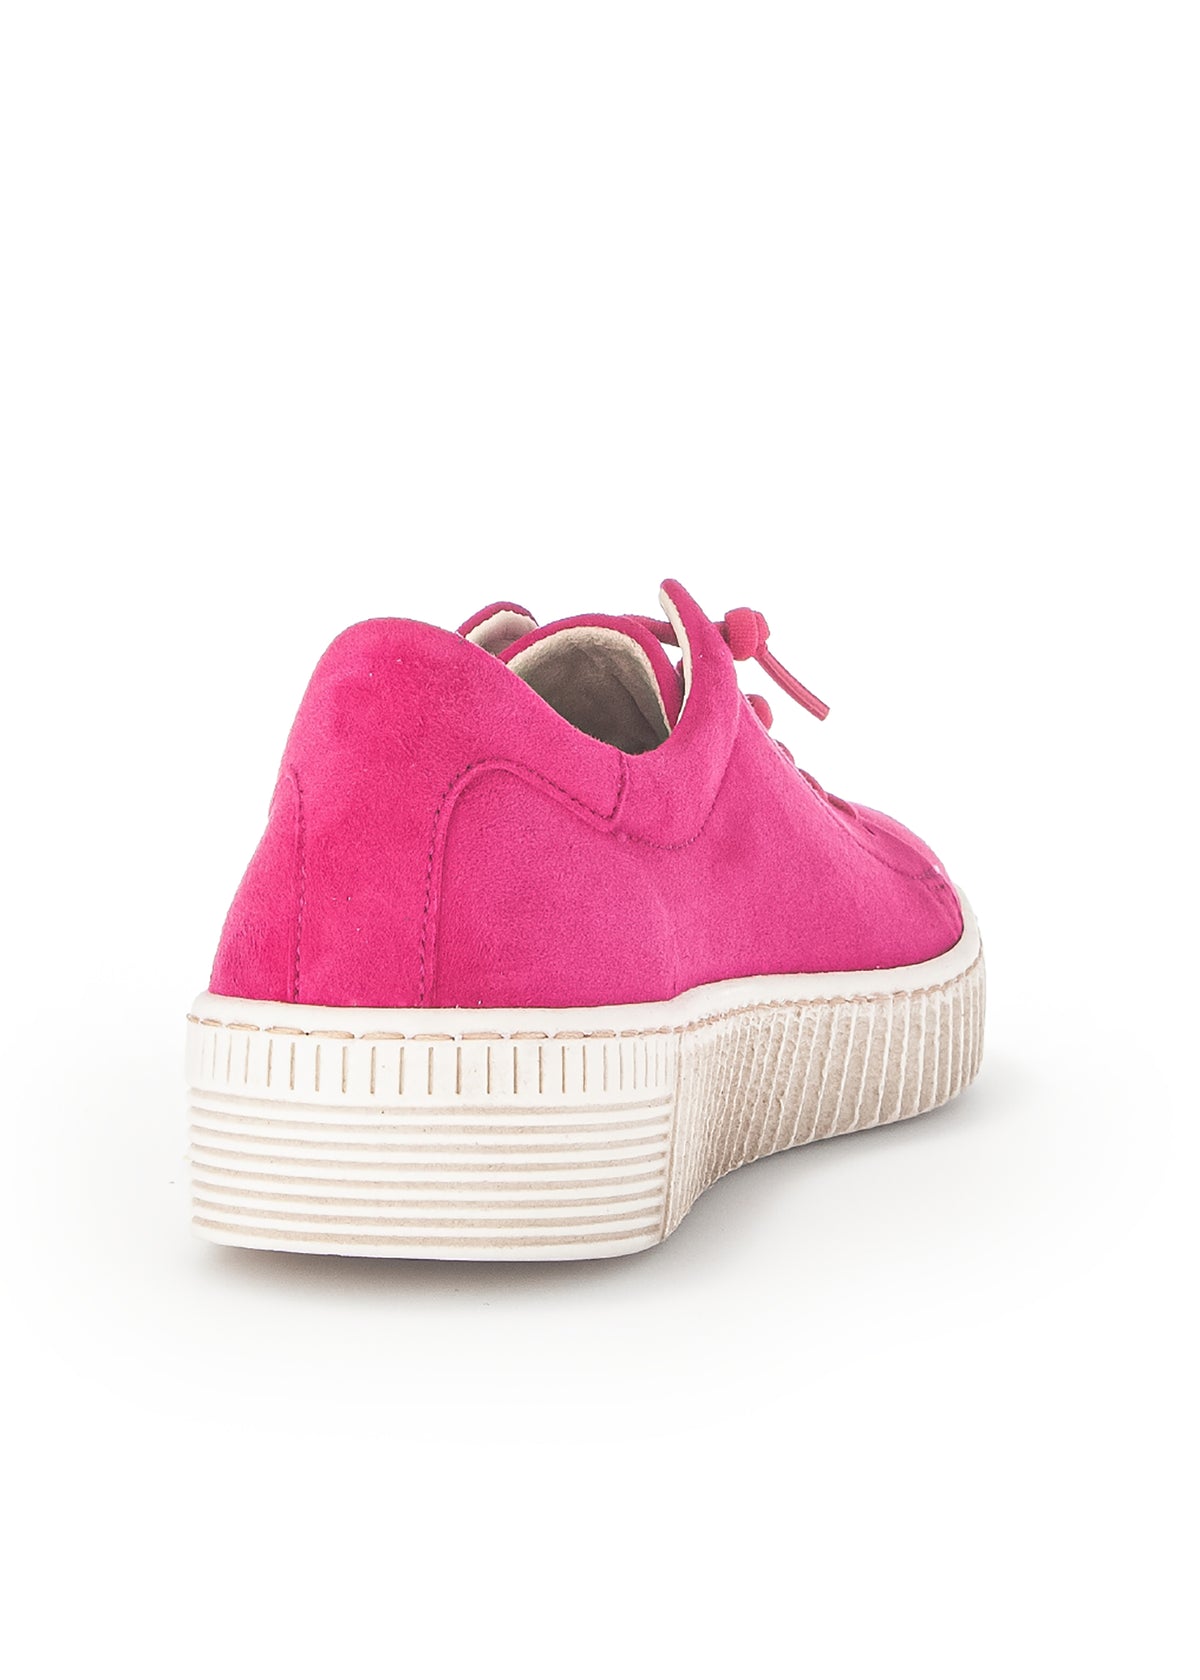 Sneakers with a thick sole - pink nubuck leather, elastic straps